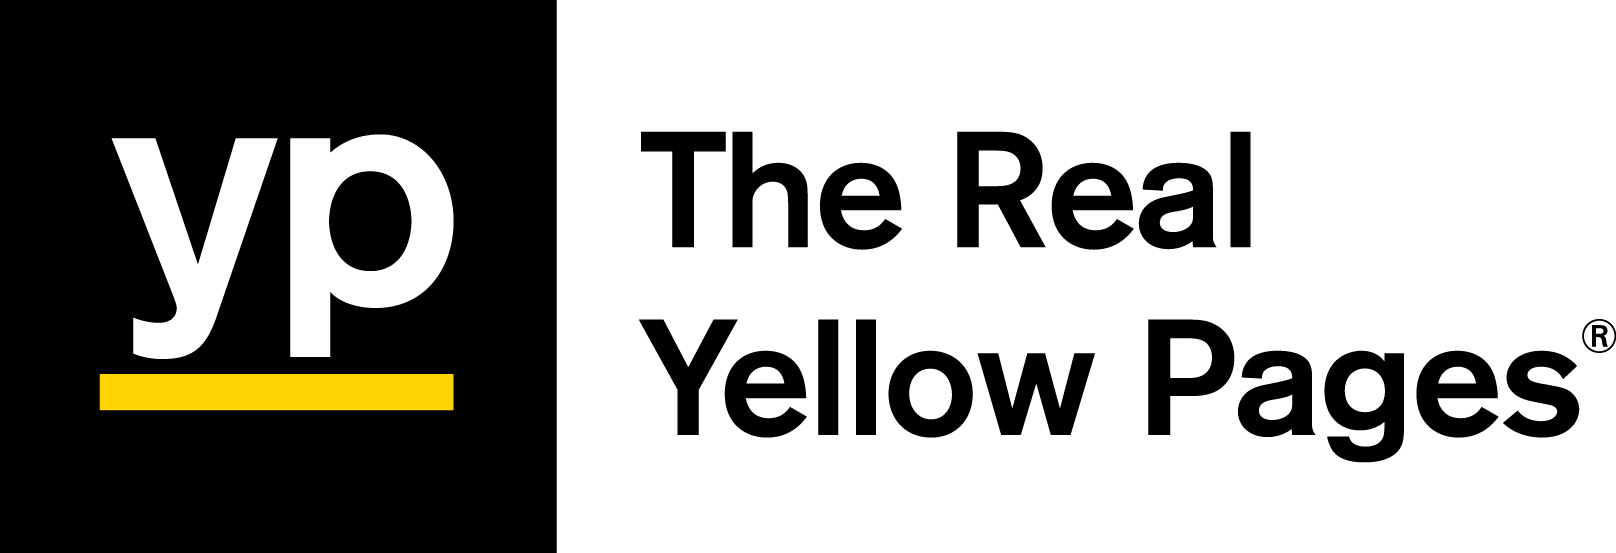 The Real Yellow Pages reviews